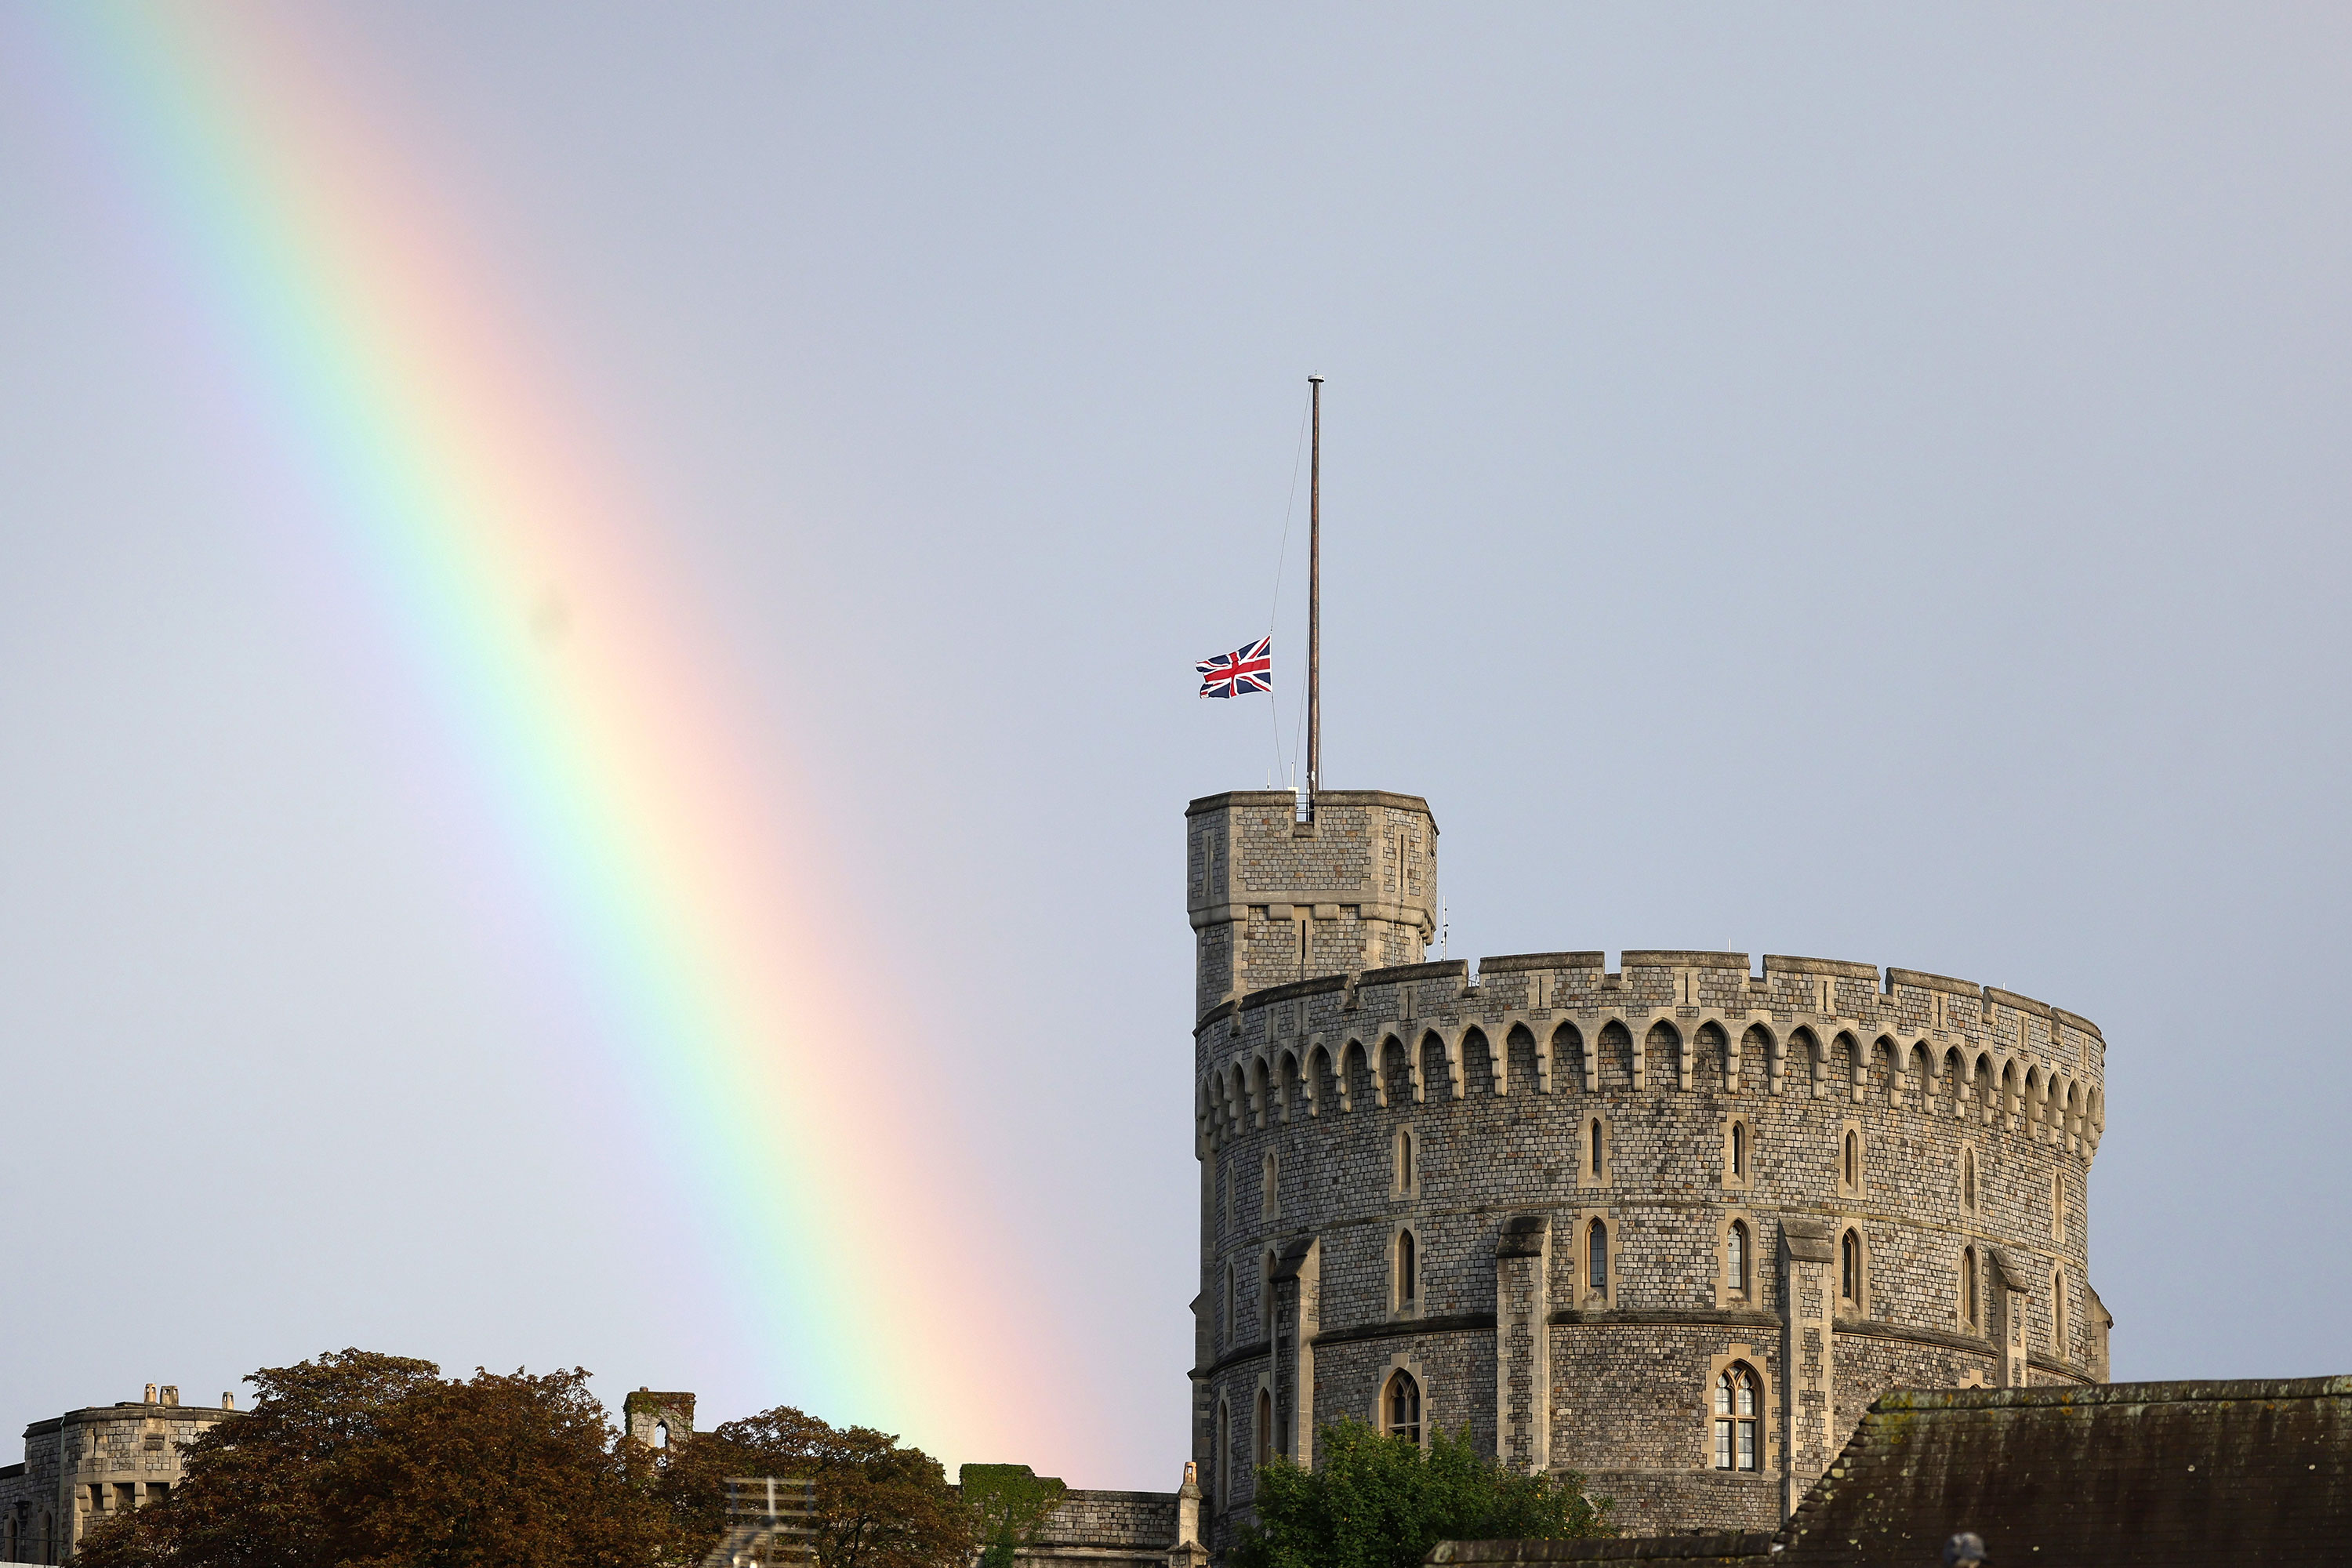 The Union flag is lowered at Windsor Castle as a rainbow covers the sky on Thursday.